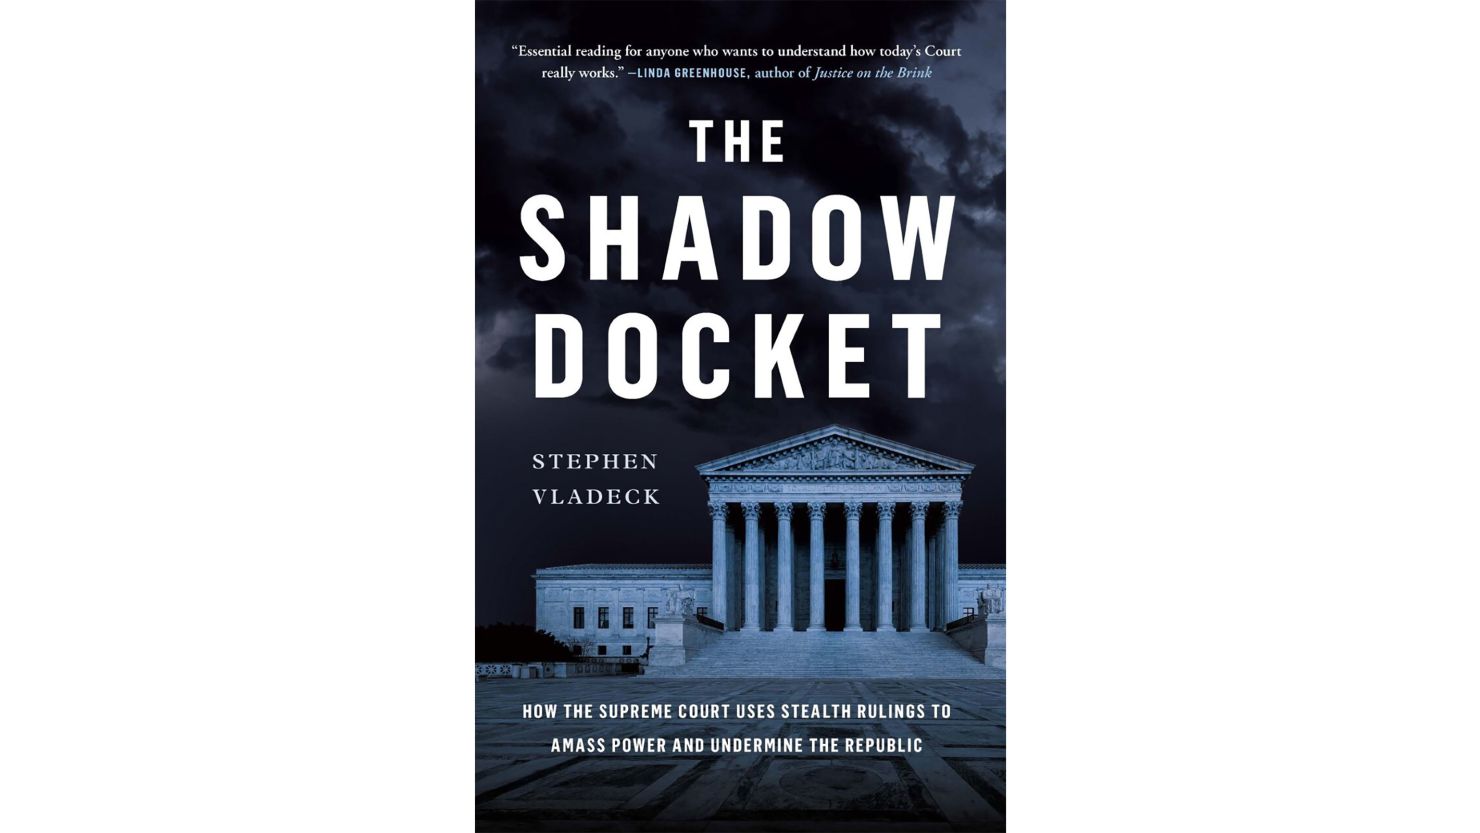 The Shadow Docket: How the Supreme Court Uses Stealth Rulings to Amass Power and Undermine the Republic